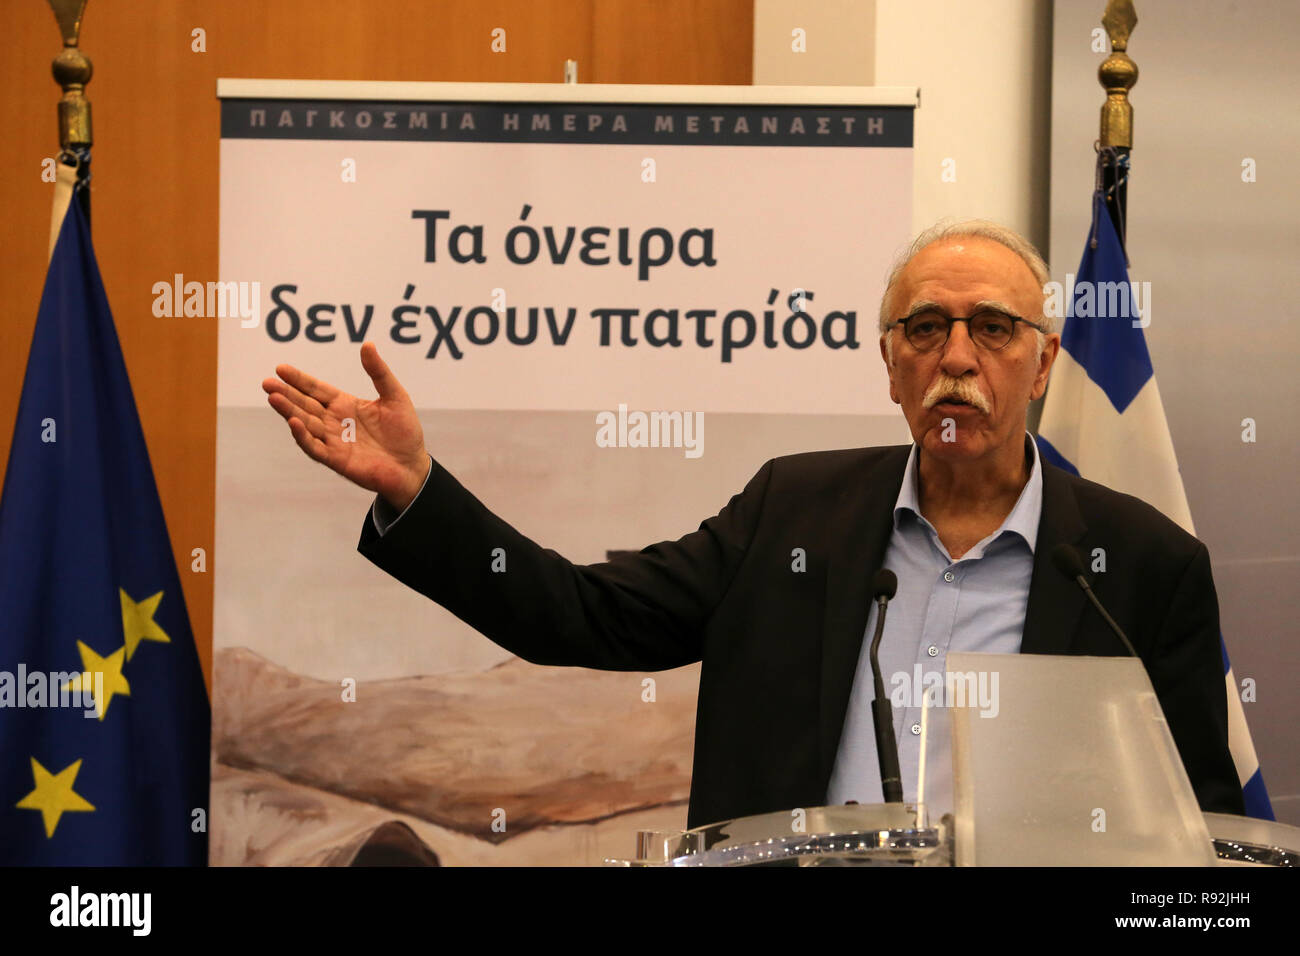 (181219) -- ATHENS, Dec. 19, 2018 (Xinhua) -- Greek Minister for Migration Policy Dimitrios Vitsas speaks at a press conference on the occasion of the International Migrants Day in Athens, Greece, on Dec. 18, 2018. Greek society has sent a clear message of solidarity to people seeking a better life away from their homelands, Greek officials told the press conference on Tuesday on the occasion of International Migrants Day, observed on Dec. 18 each year since 2000. During the eight years of the debt crisis, Greece has been working systematically towards the smooth integration of migrants in dif Stock Photo